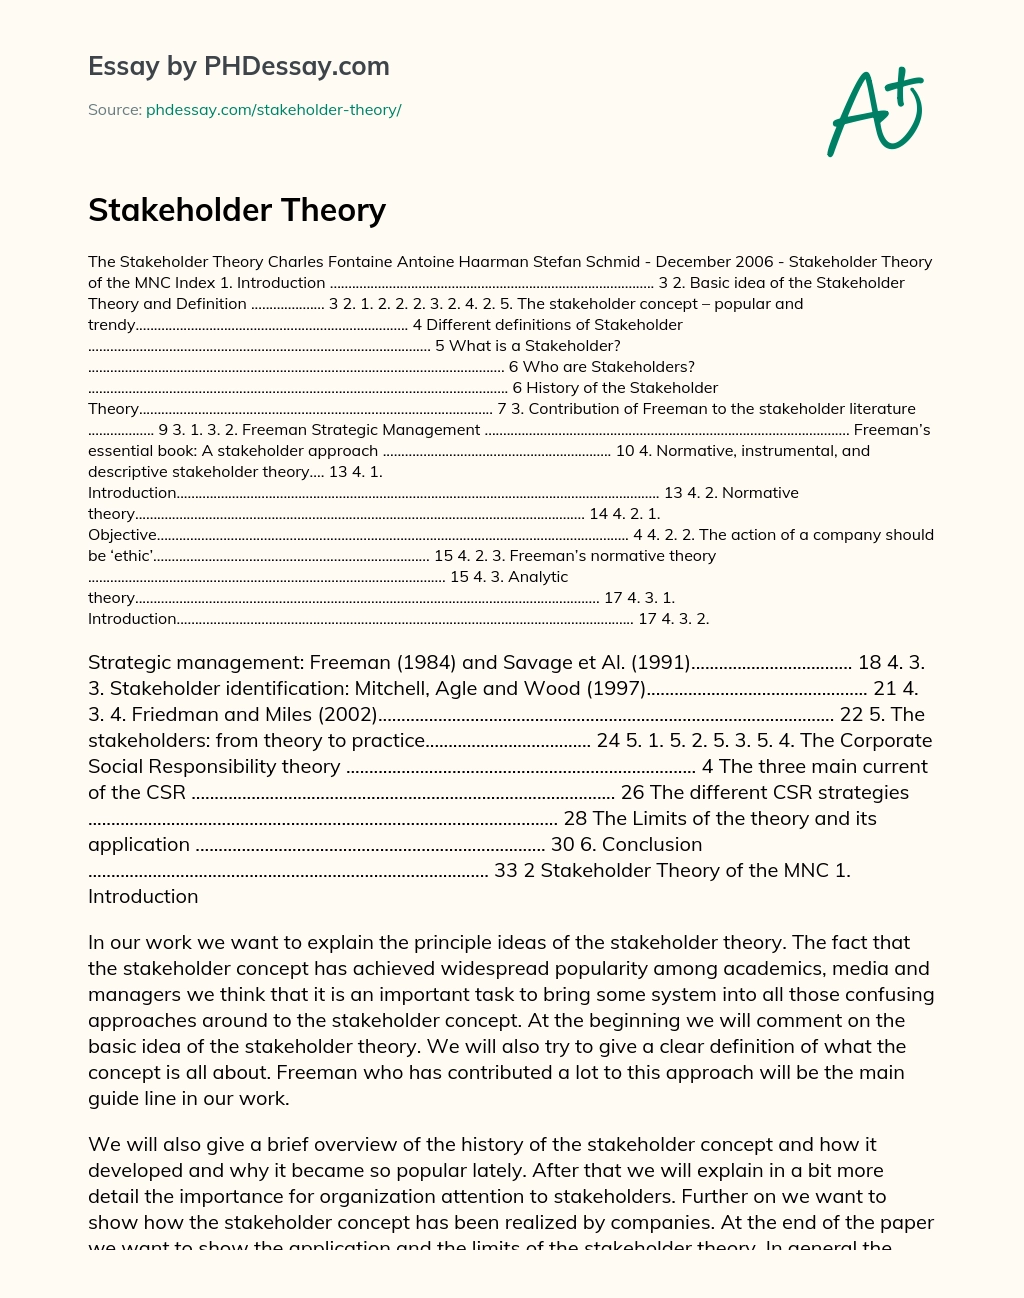 Stakeholder Theory essay